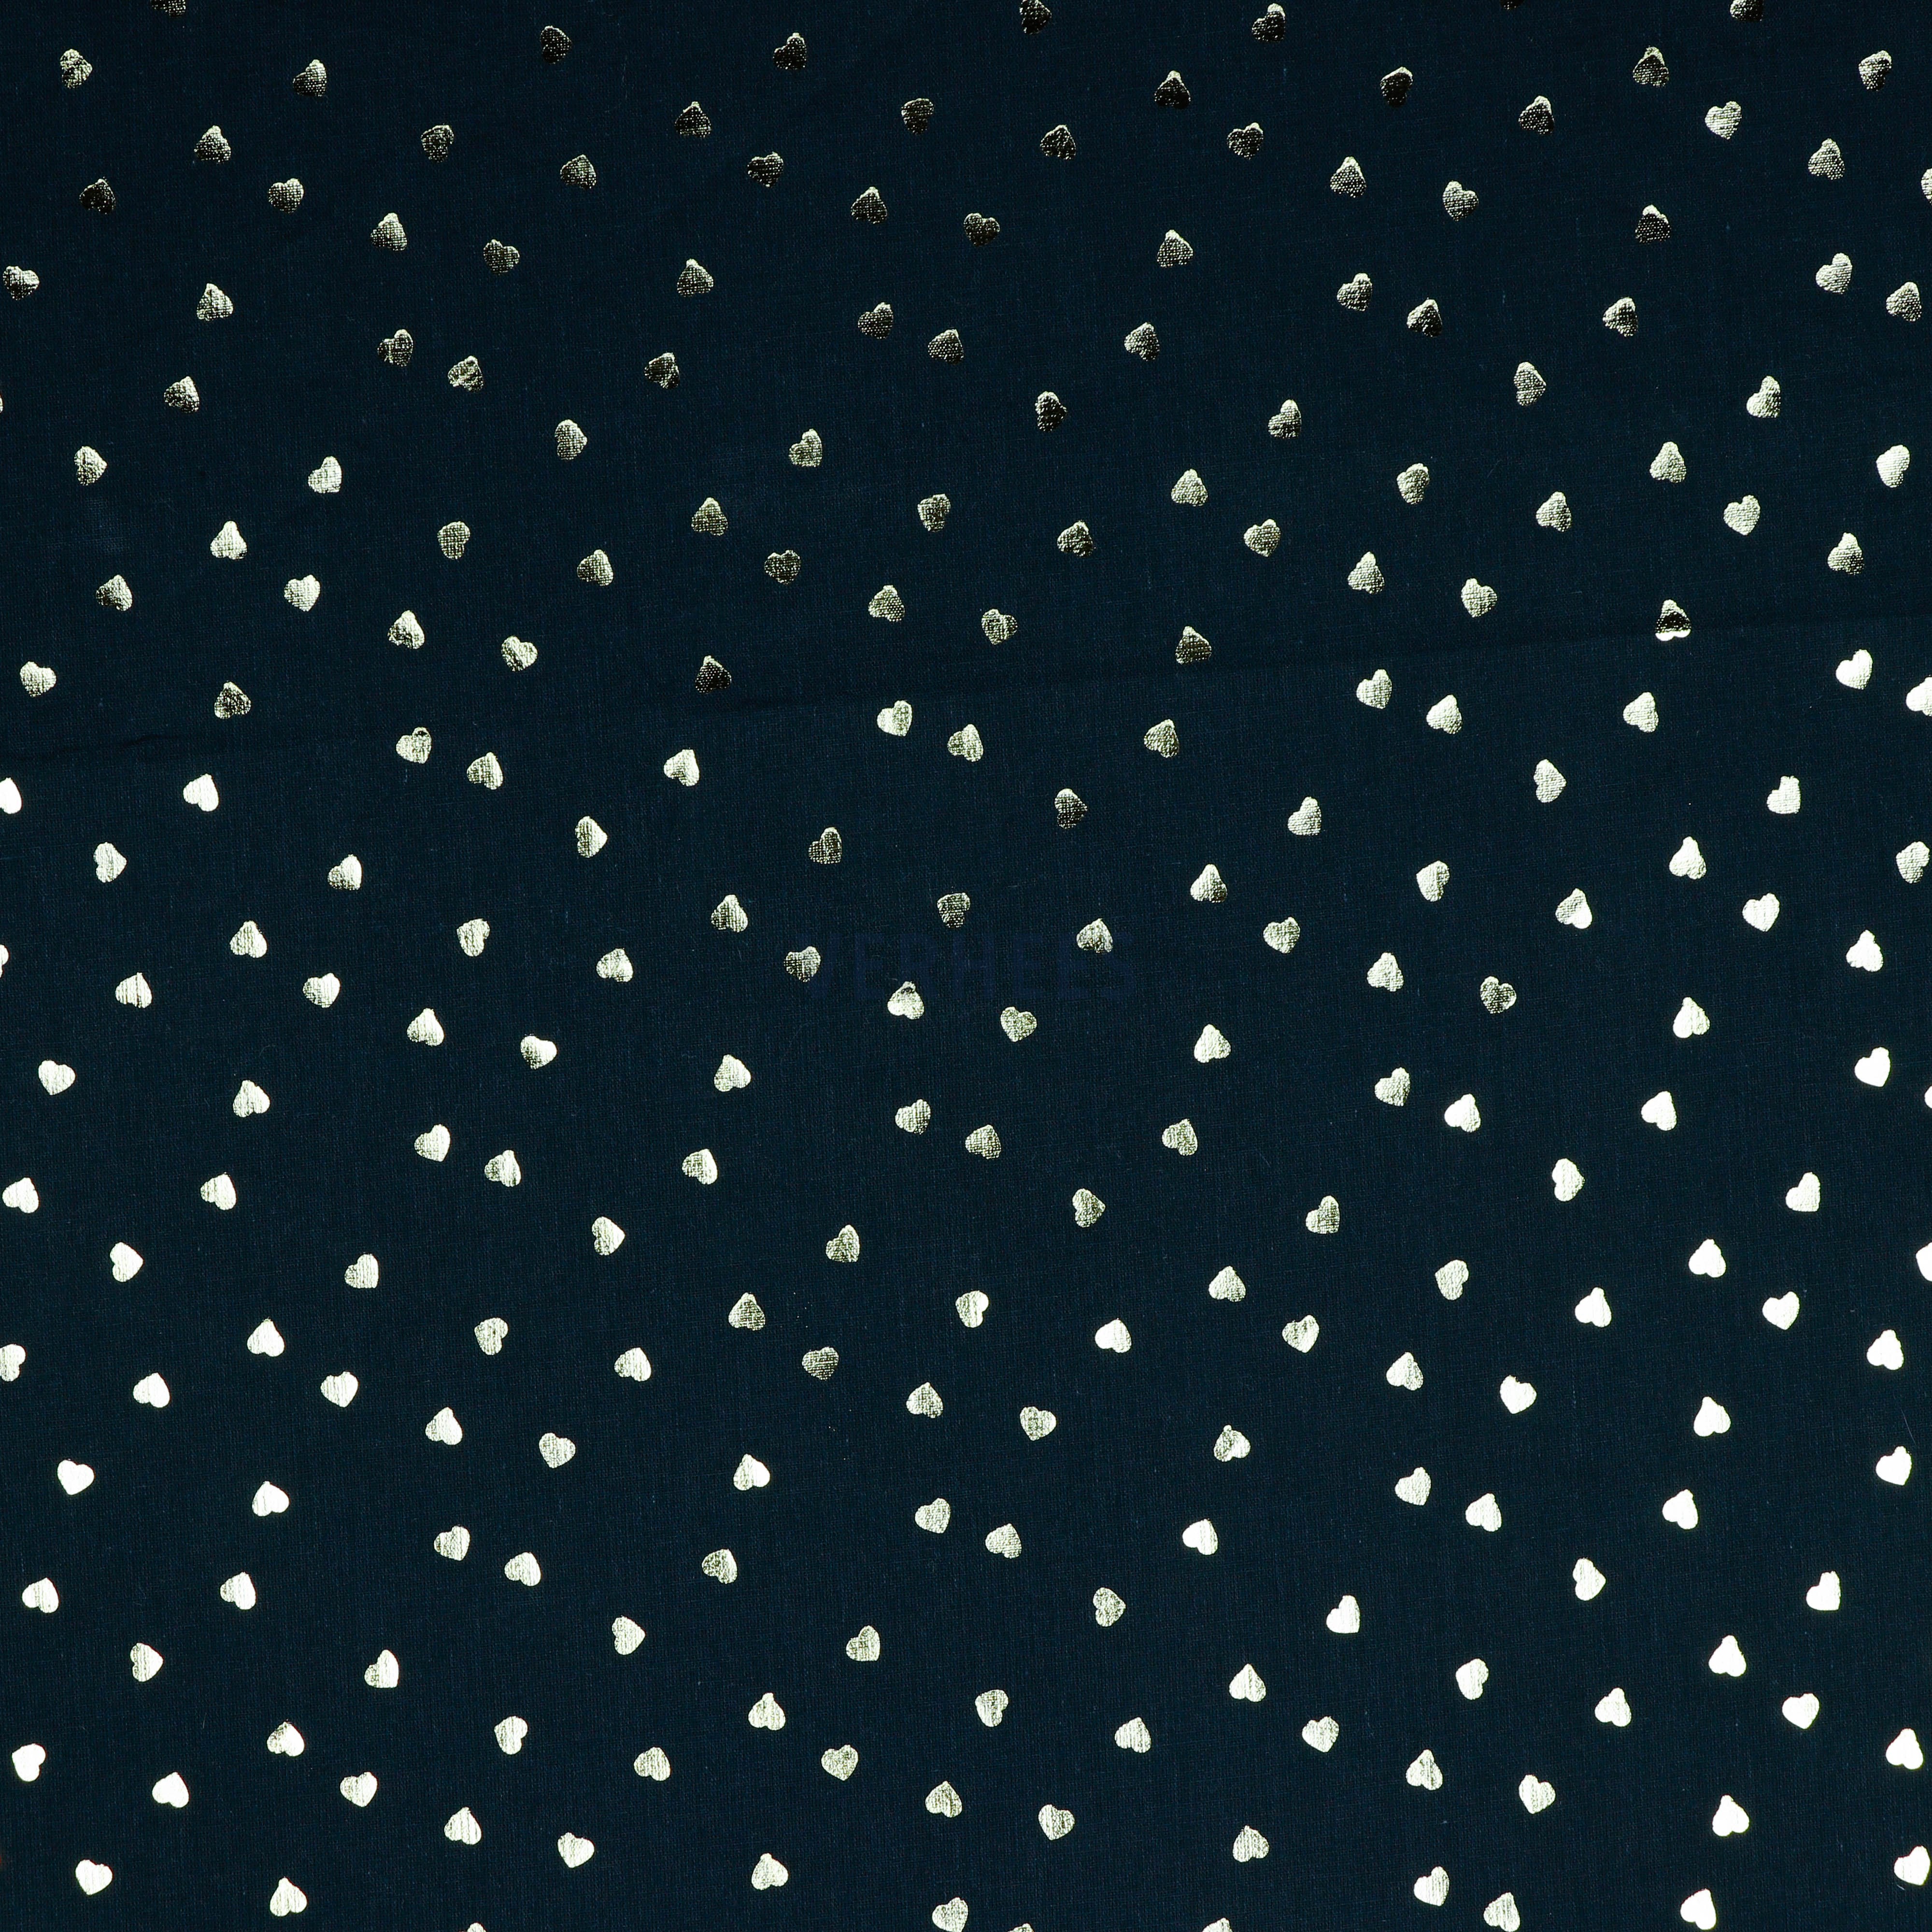 COTTON FOIL HEARTS NAVY (high resolution)